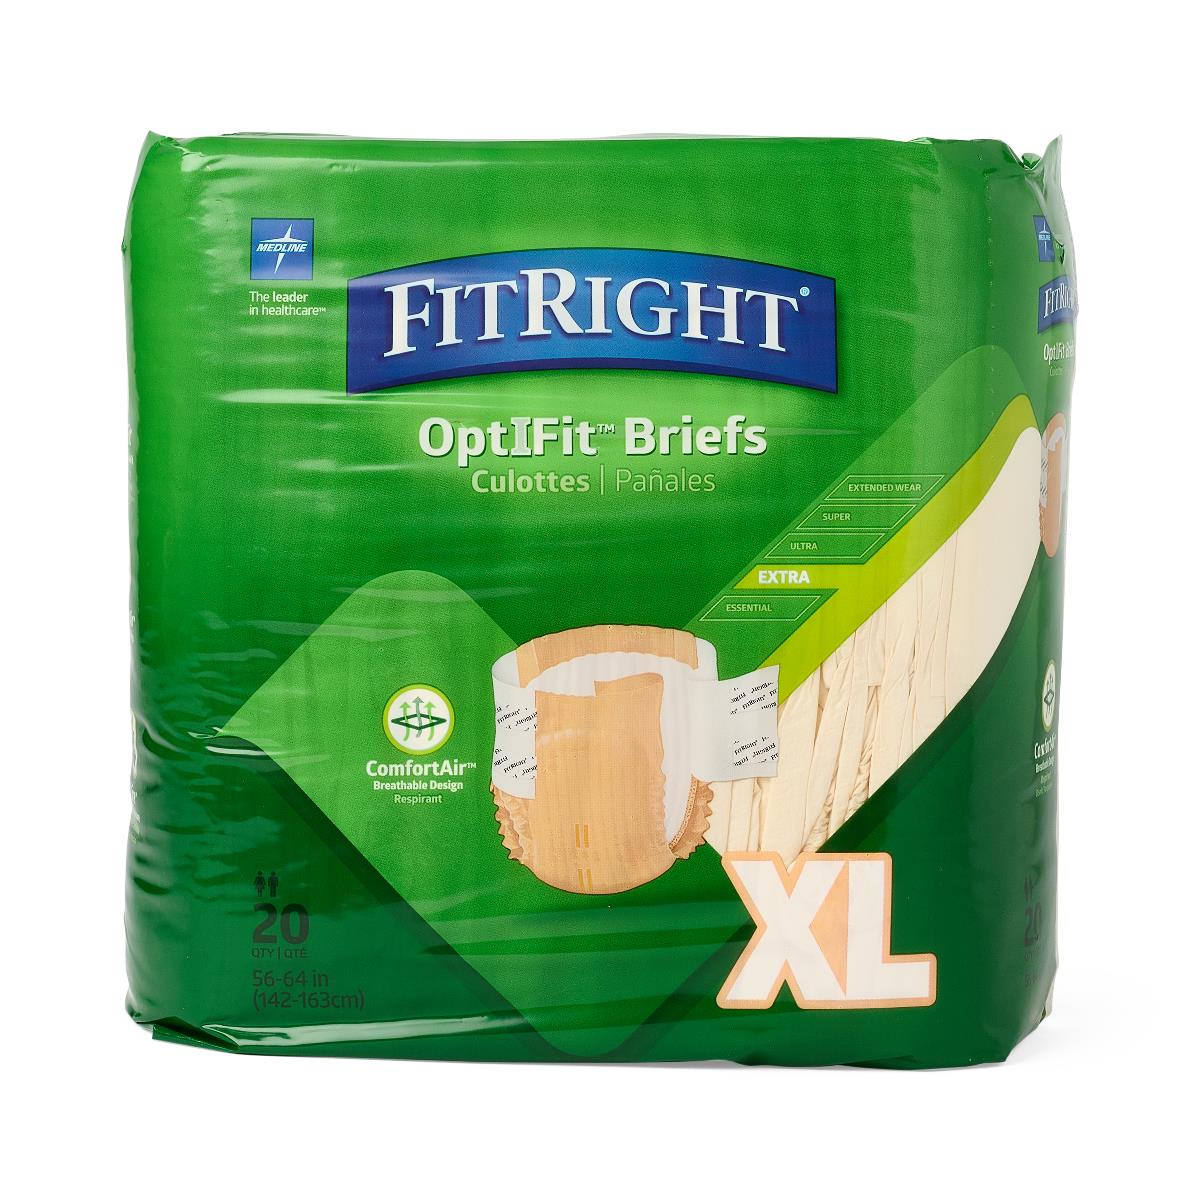 Medline FitRight OptiFit Extra Brief Size XL 56"-64", 80/cs FITEXTRAXLG